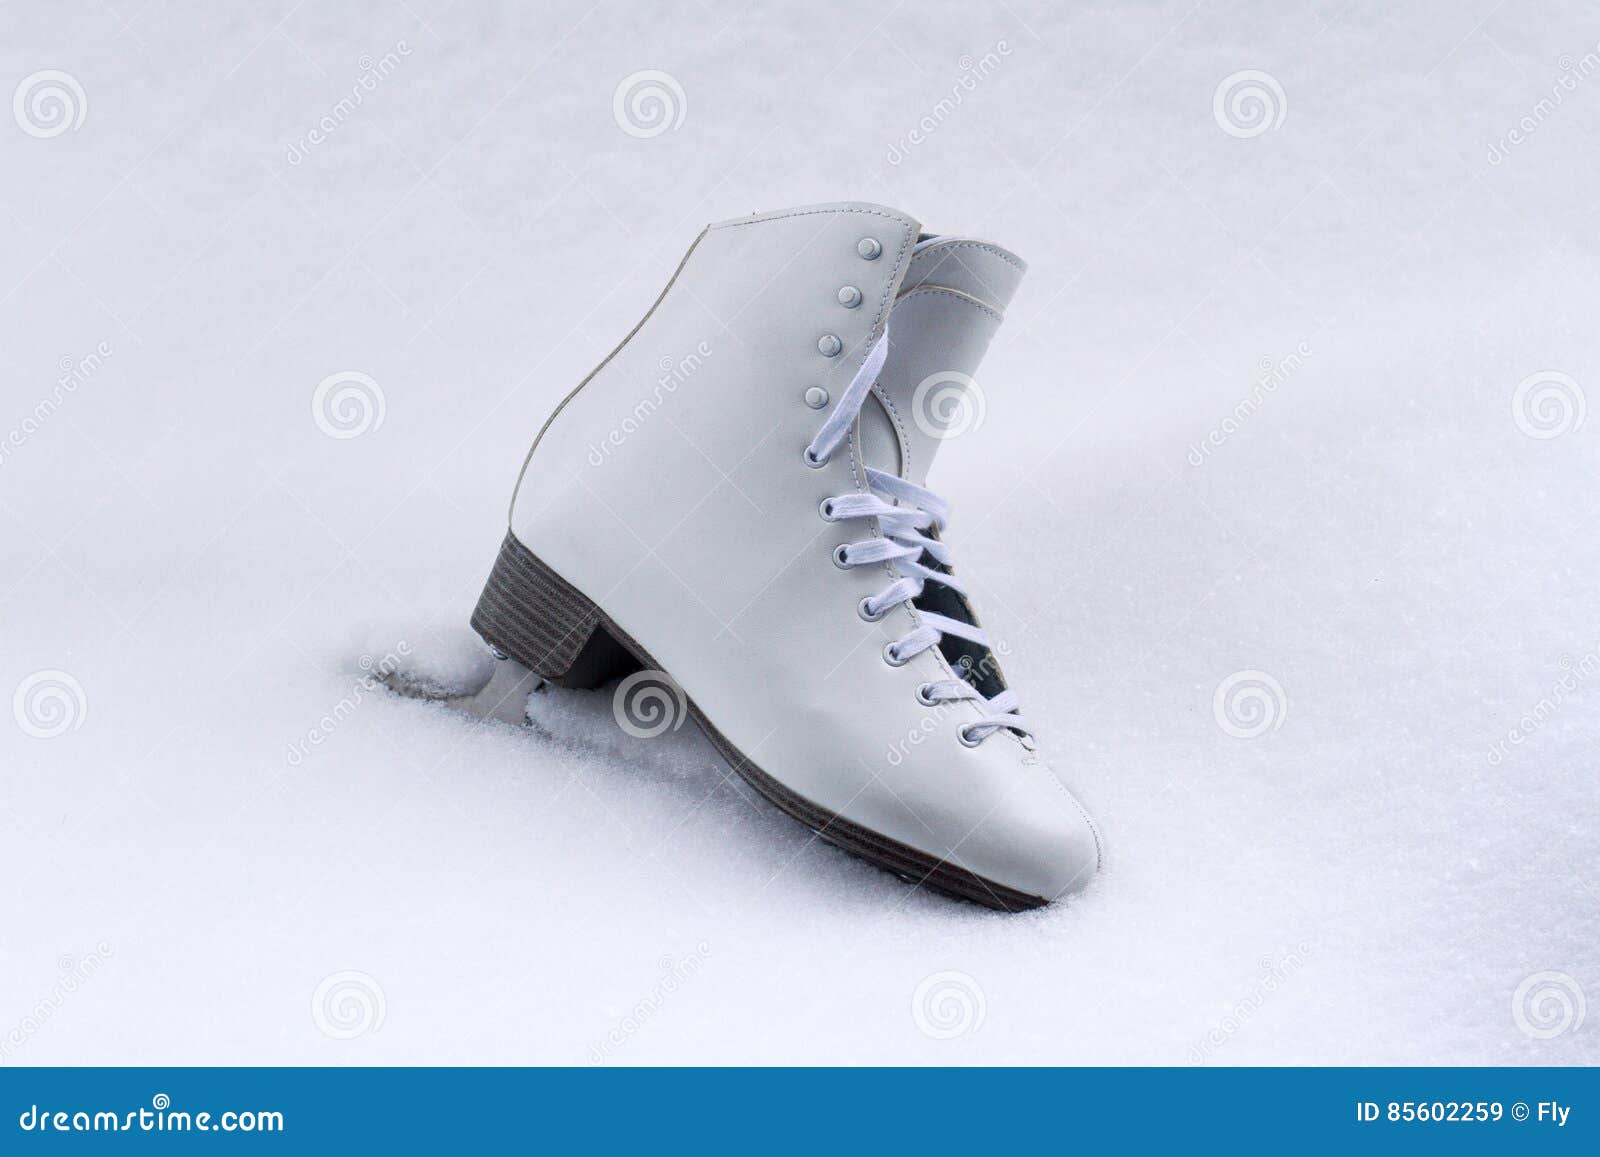 white classical iceskate shoe partially covered in snow